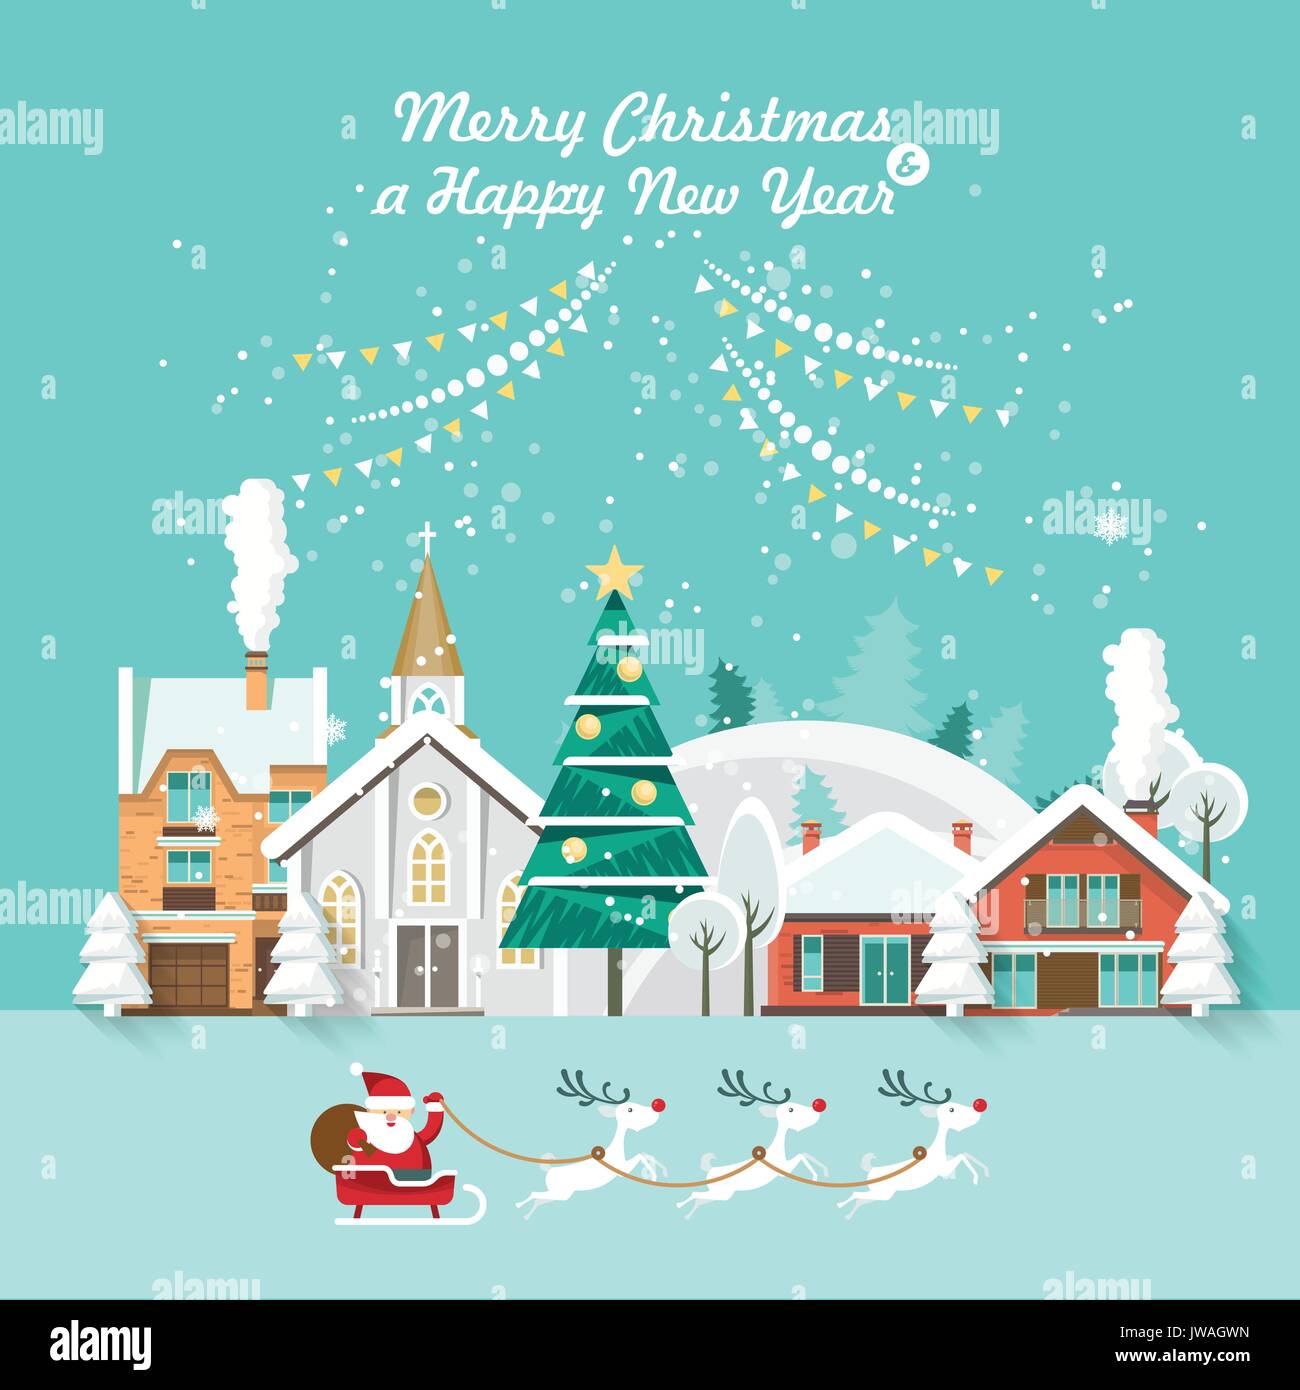 Merry Christmas and a Happy New Year vector greeting card in modern flat design Christmas